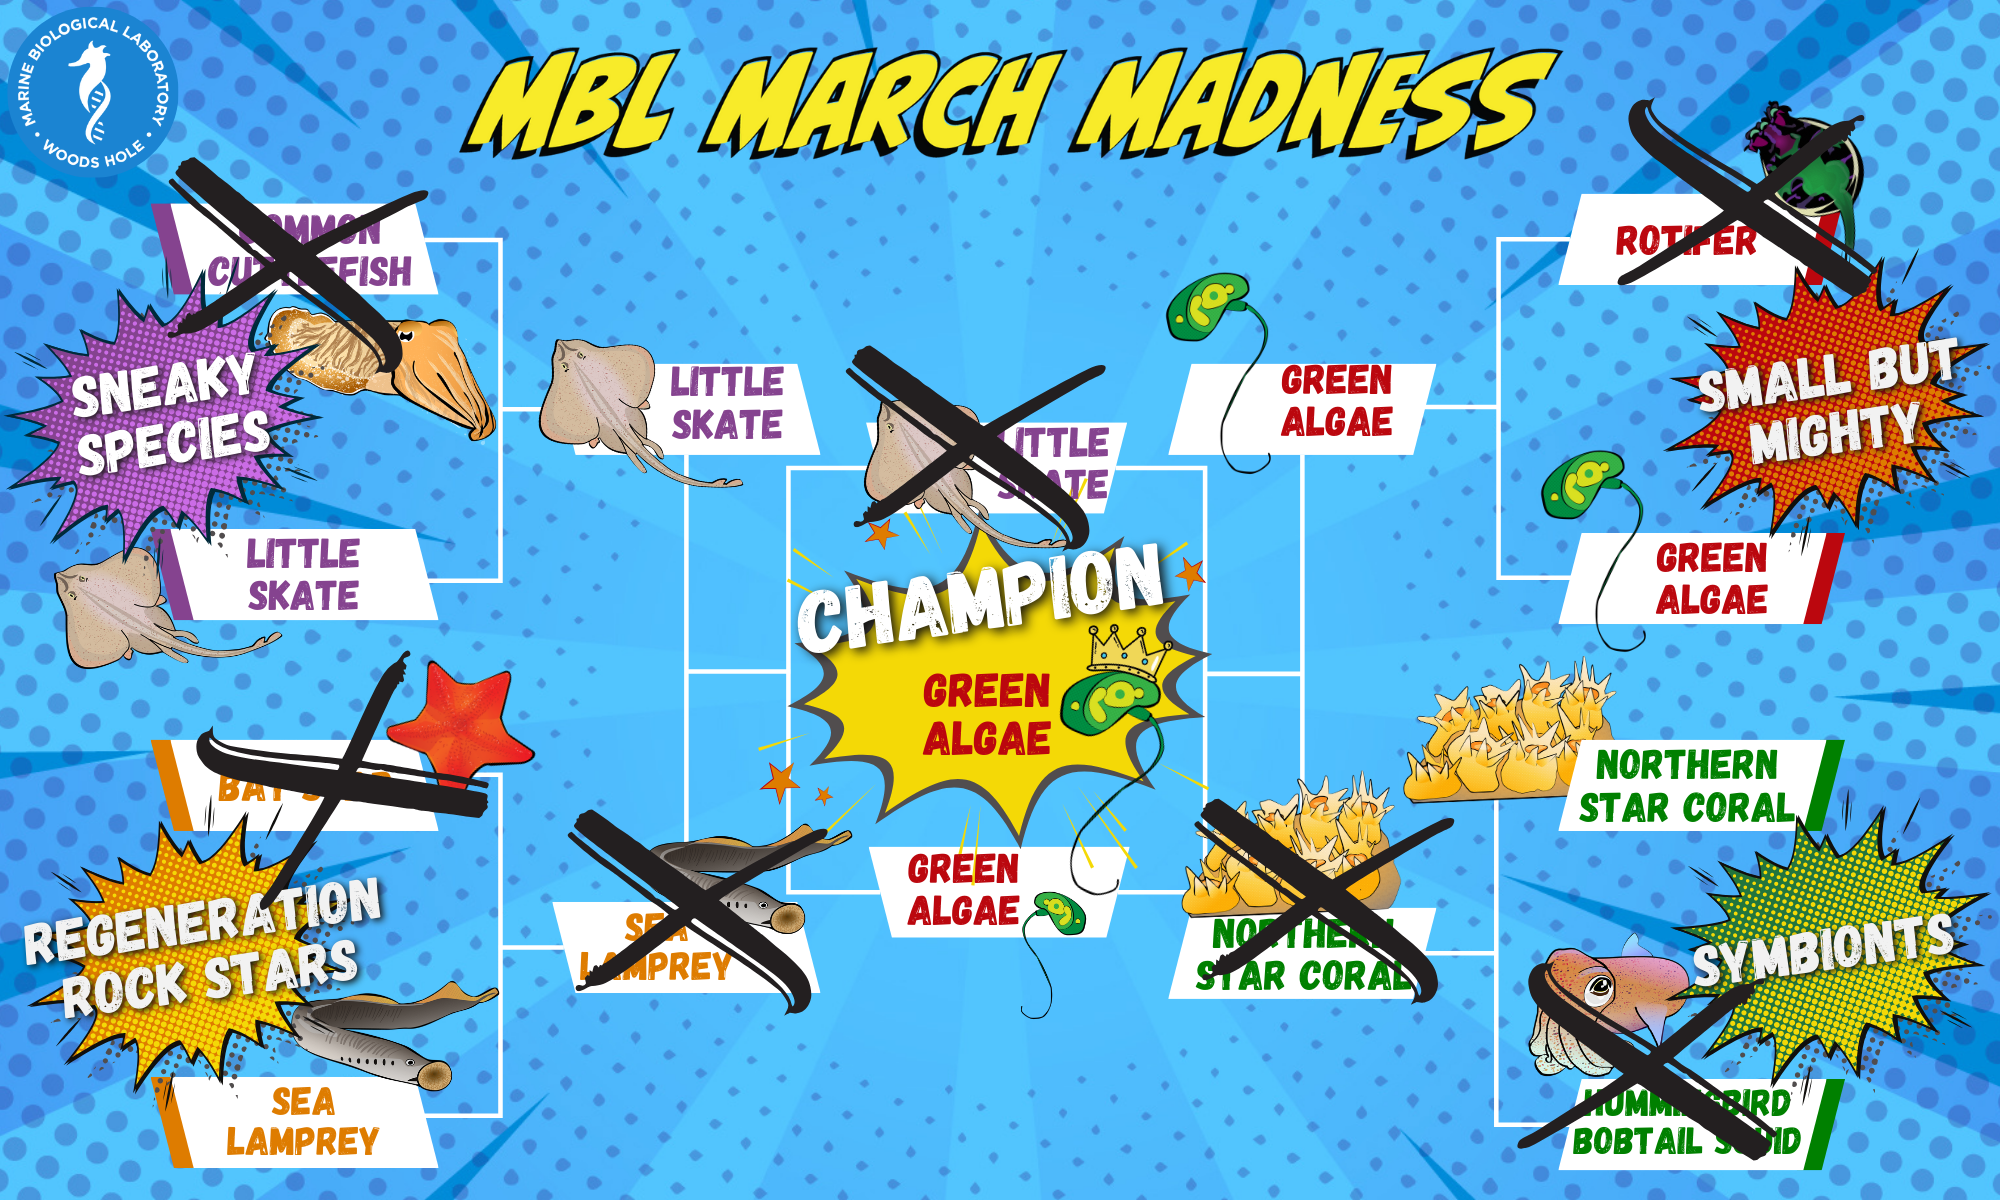 MBL March Madness Final vote. Green Algae is the 2024 champion